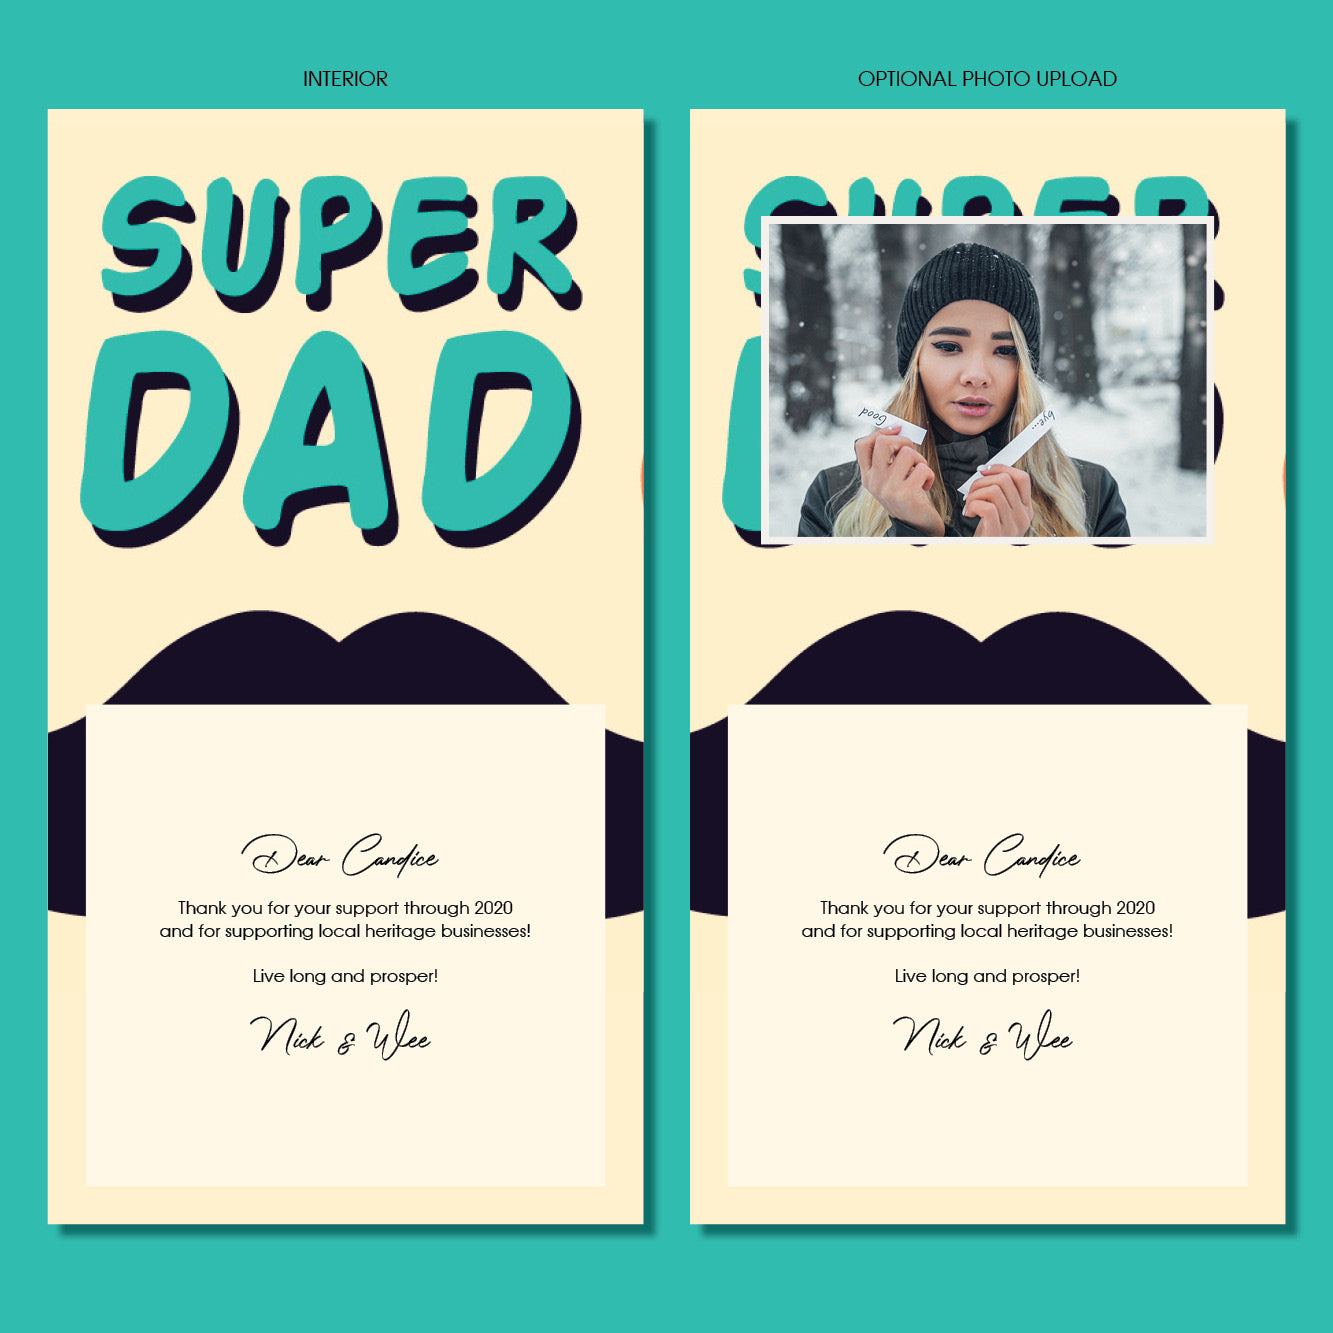 Father's Day - Super Dad!!!